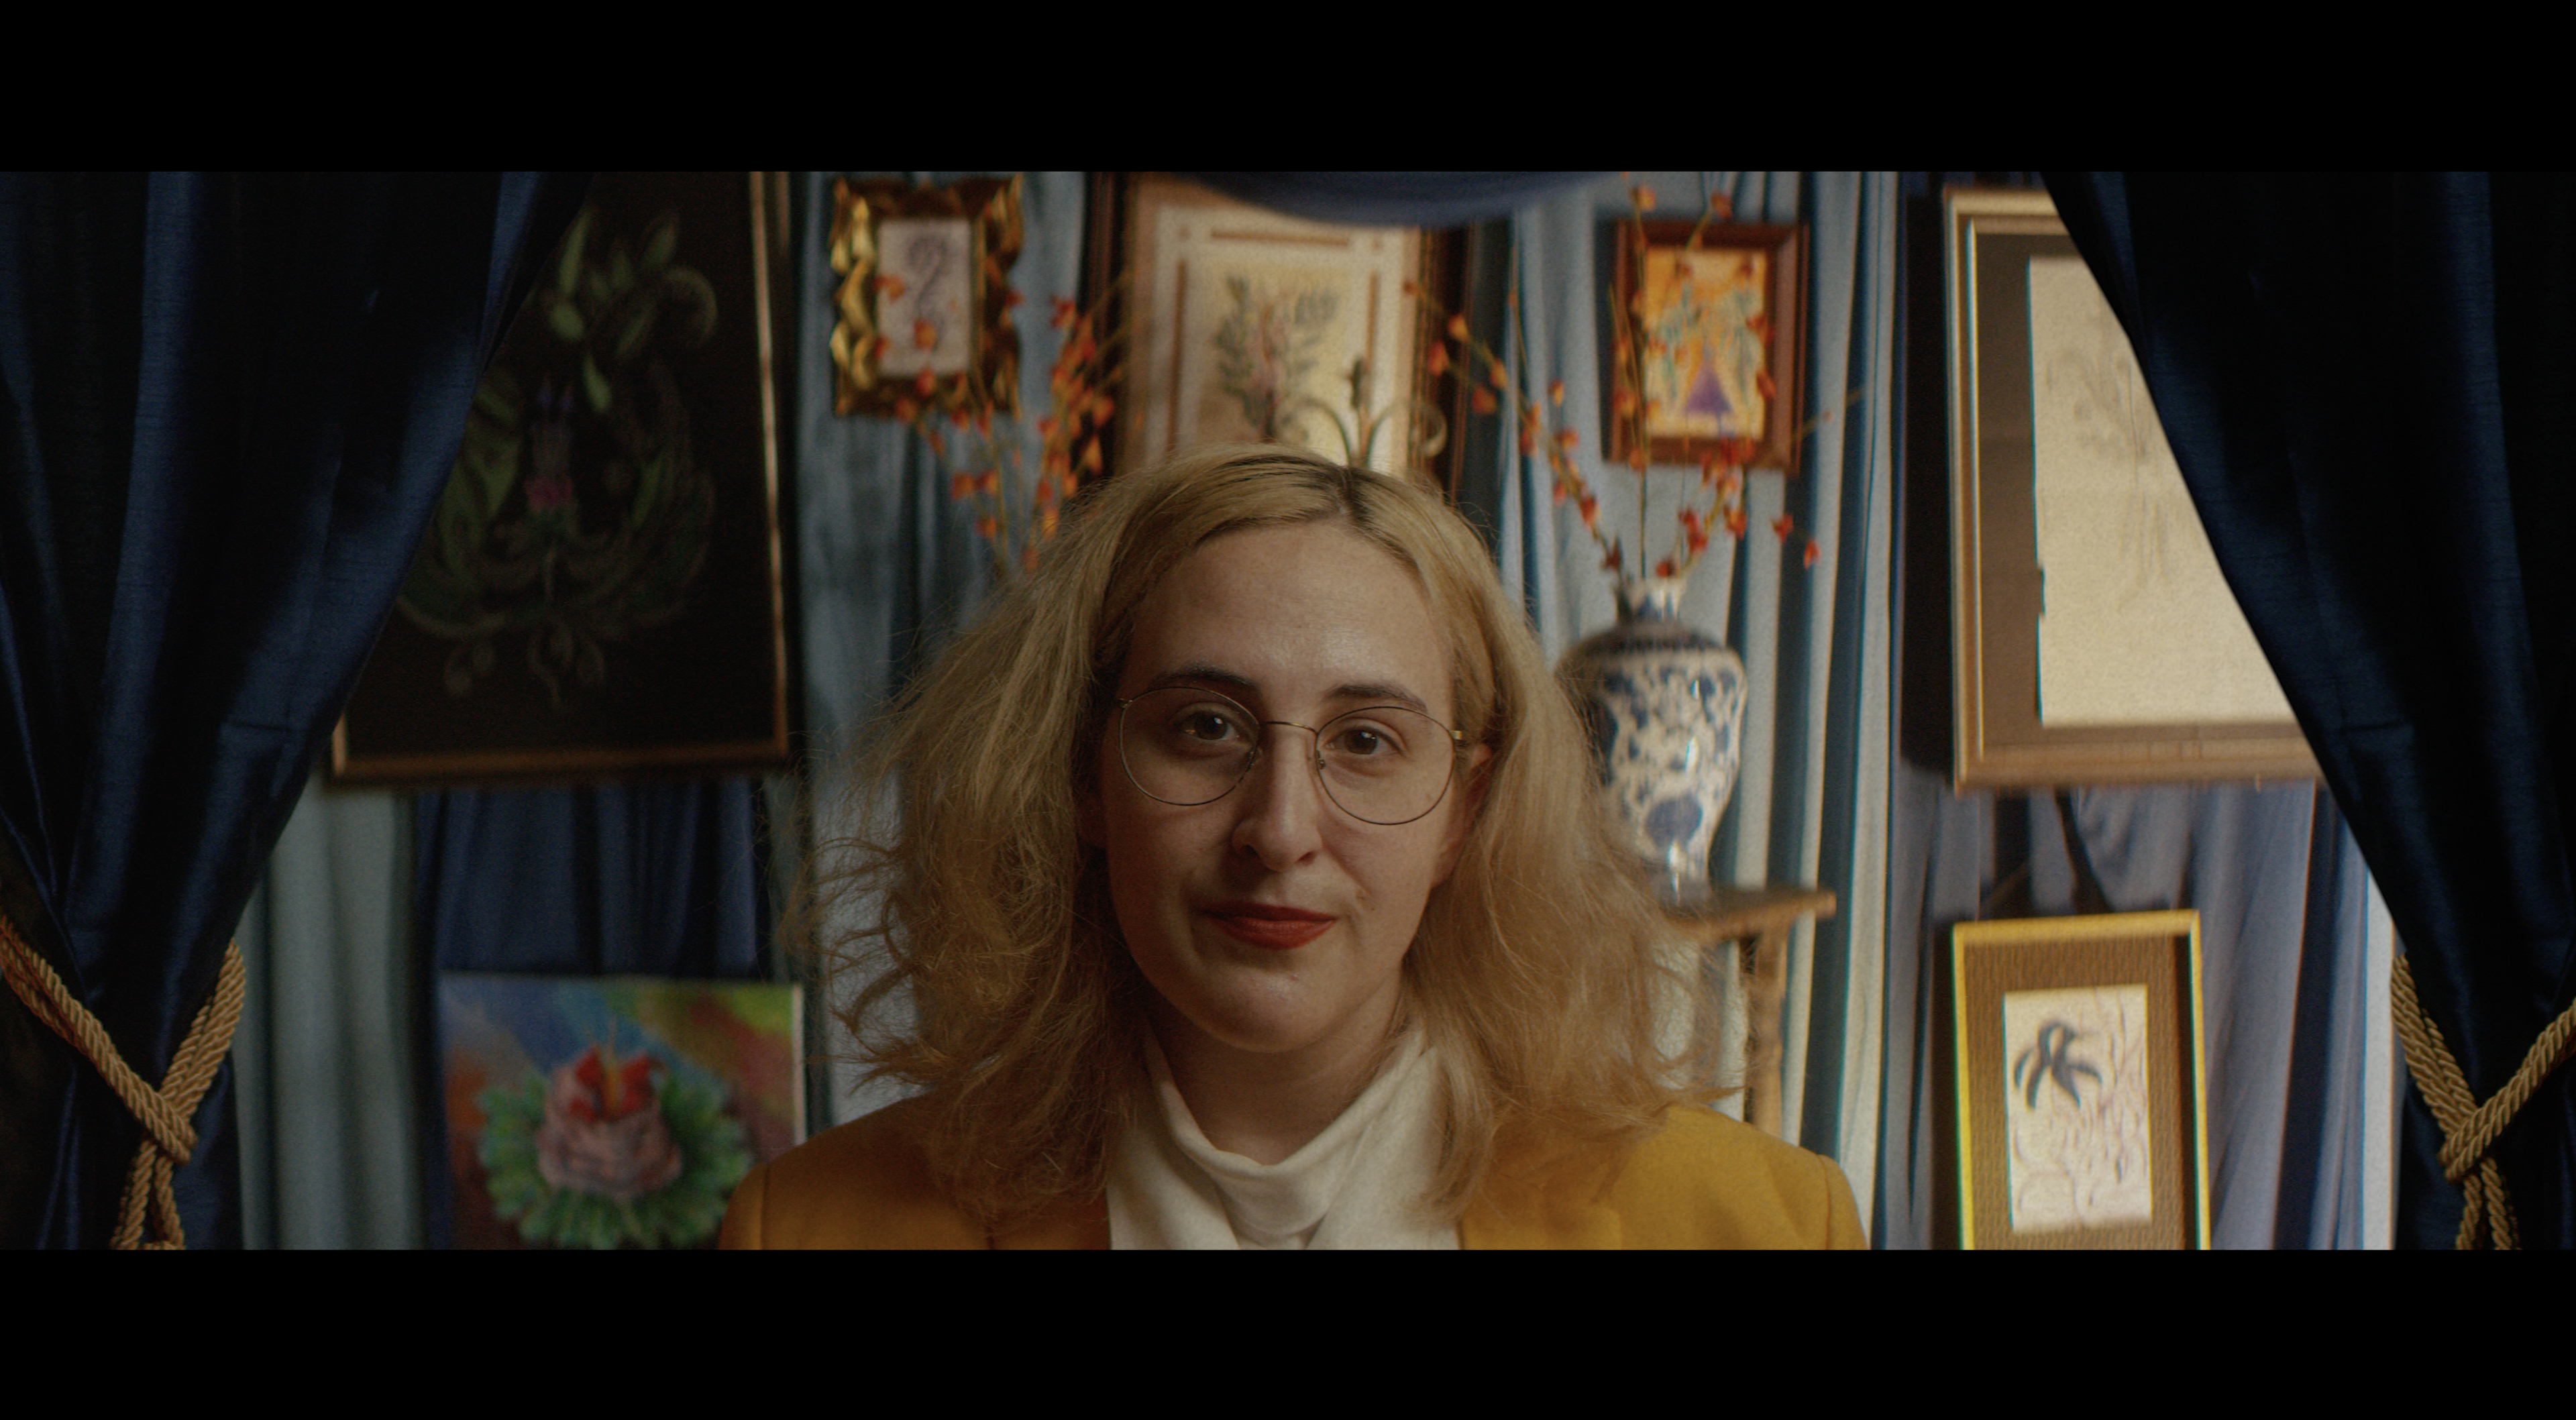 Image Description: A still image from a short film. A person in a yellow suit jacket looks directly into the camera framed by two blue curtains. They stand in front of various artworks.